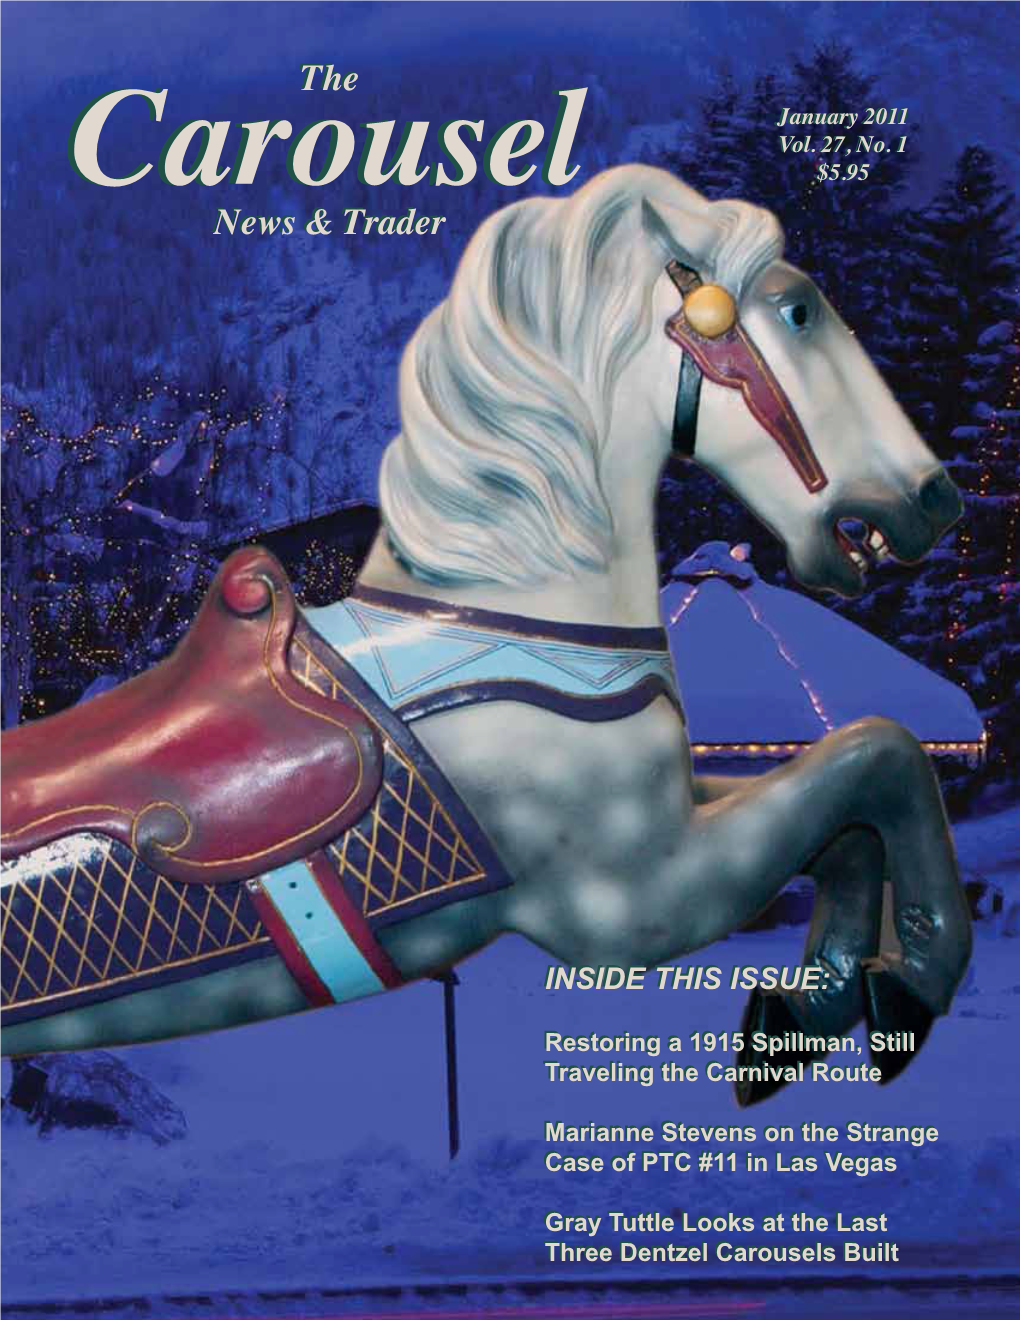 The Carousel News & Trader